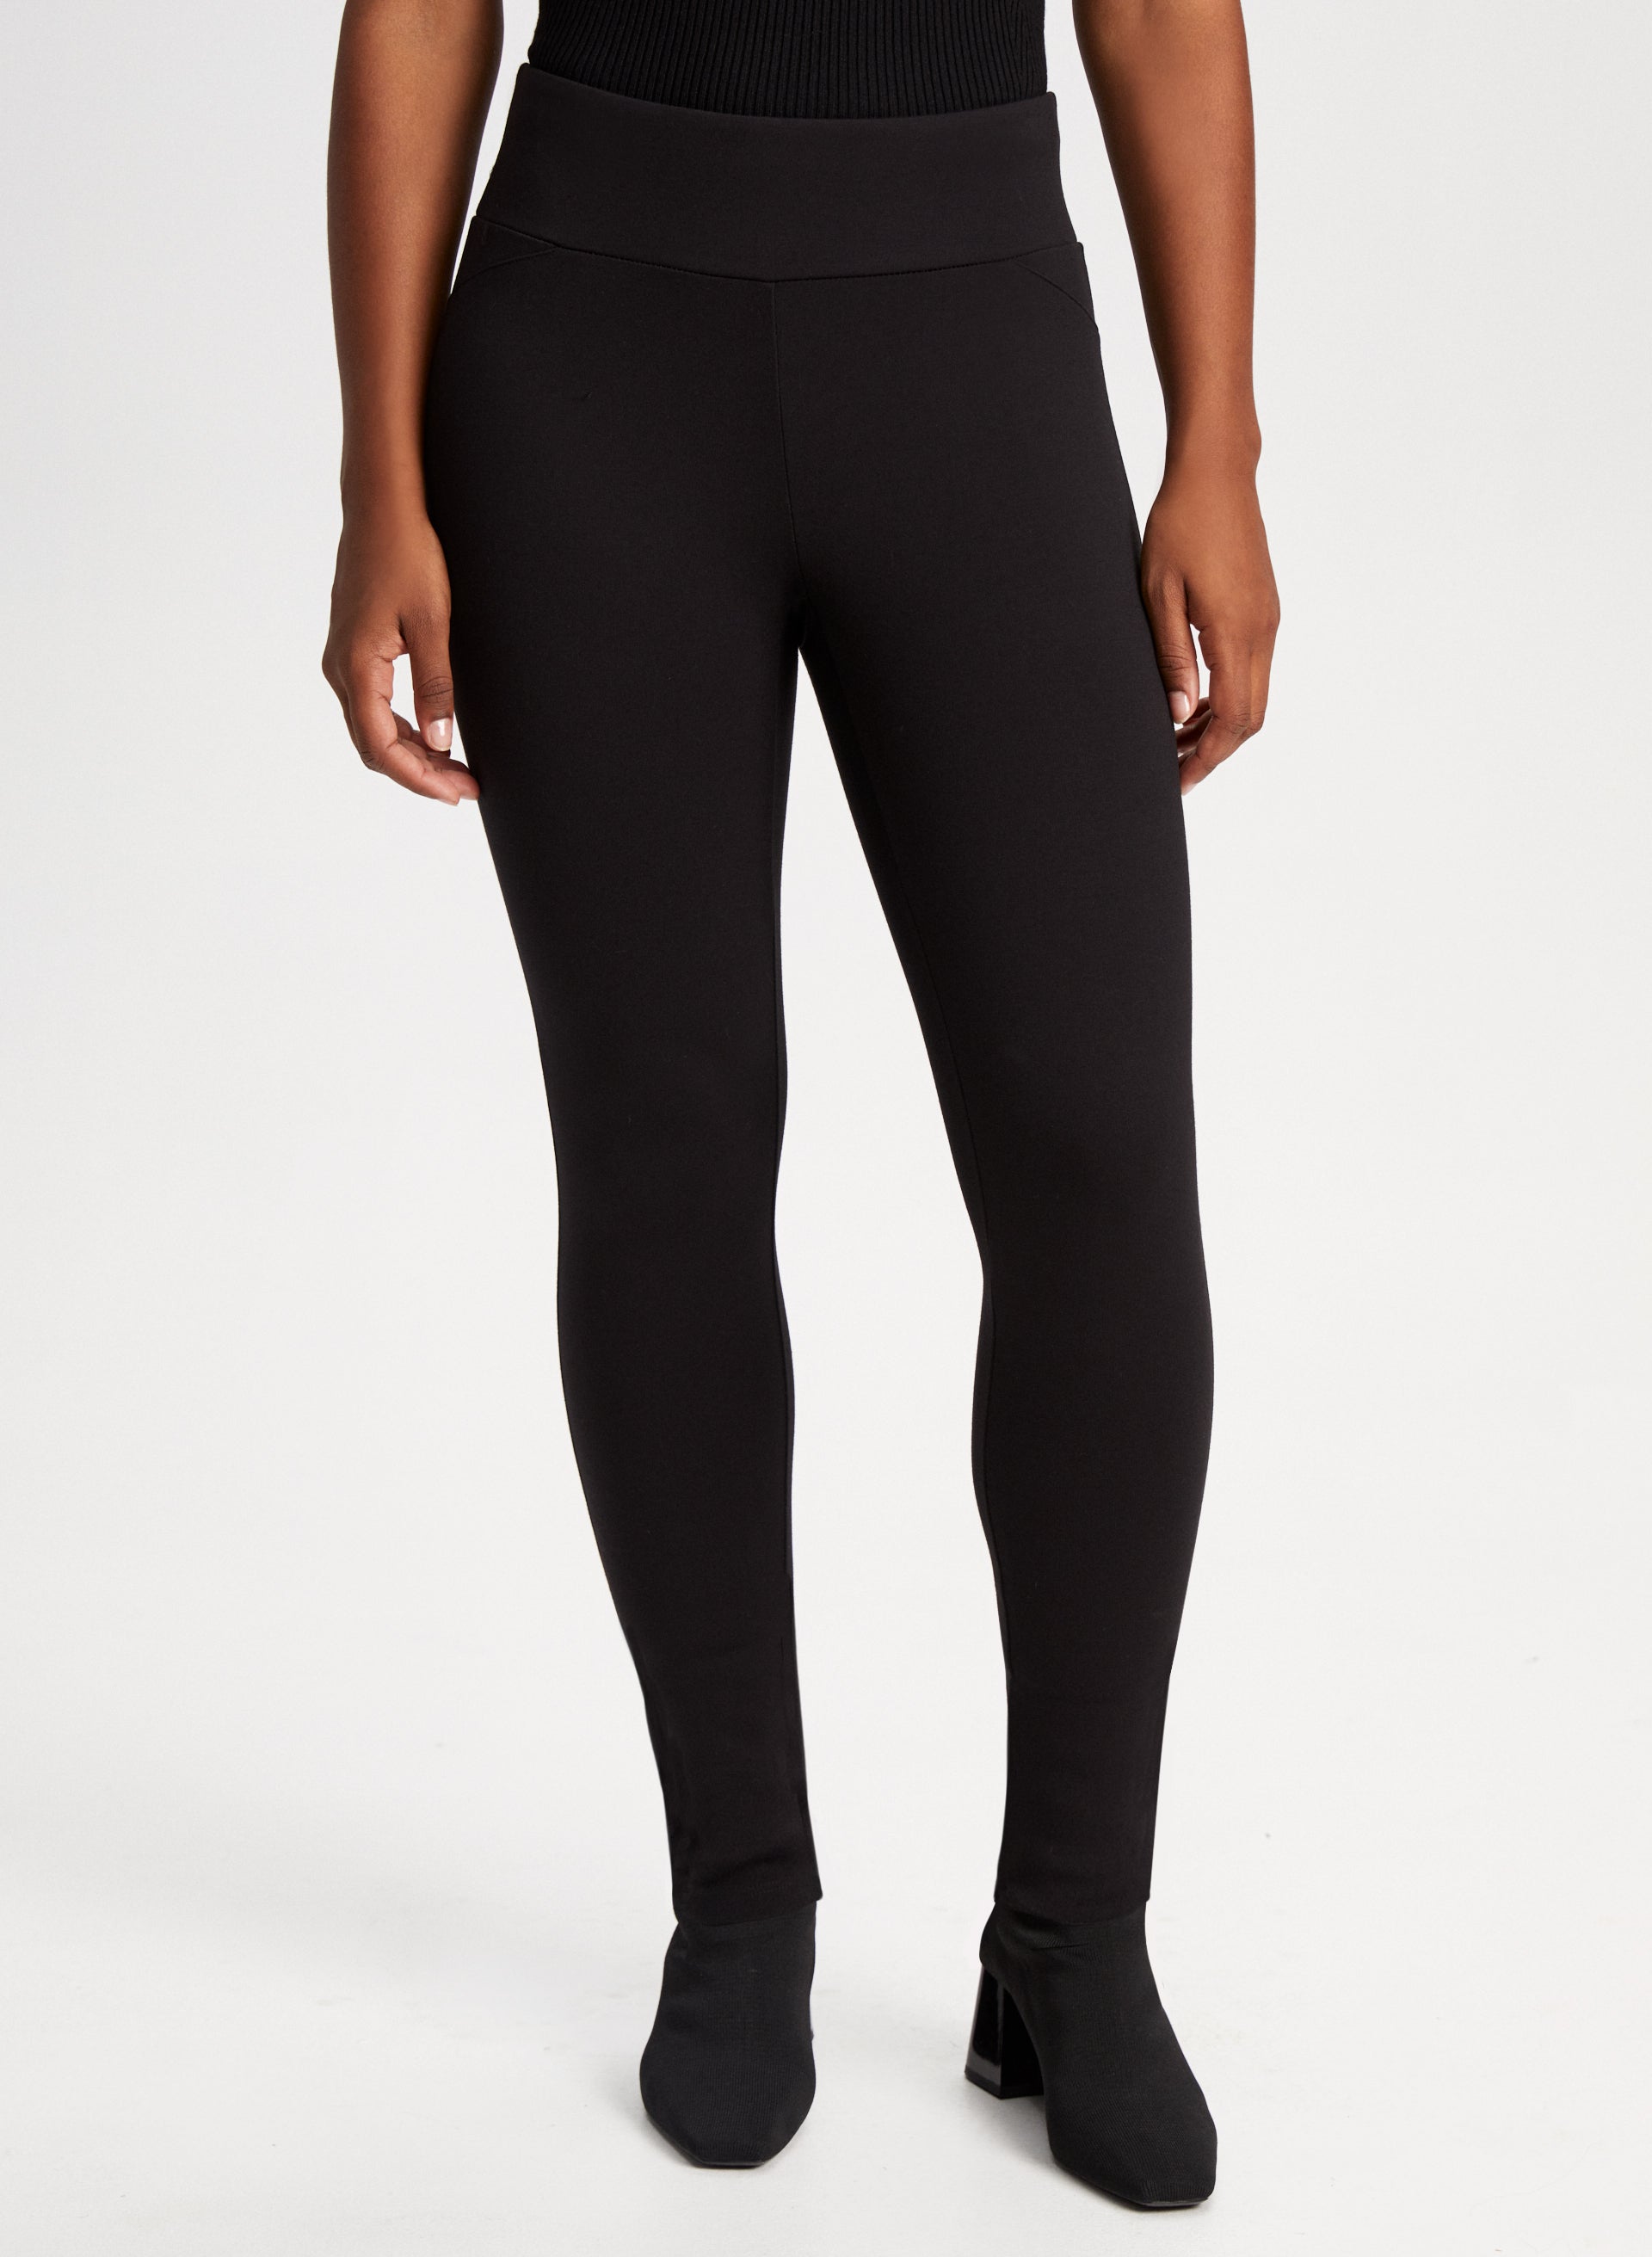 Redefining comfort: Your guide to seamless athletic leggings for women -  Upworthy